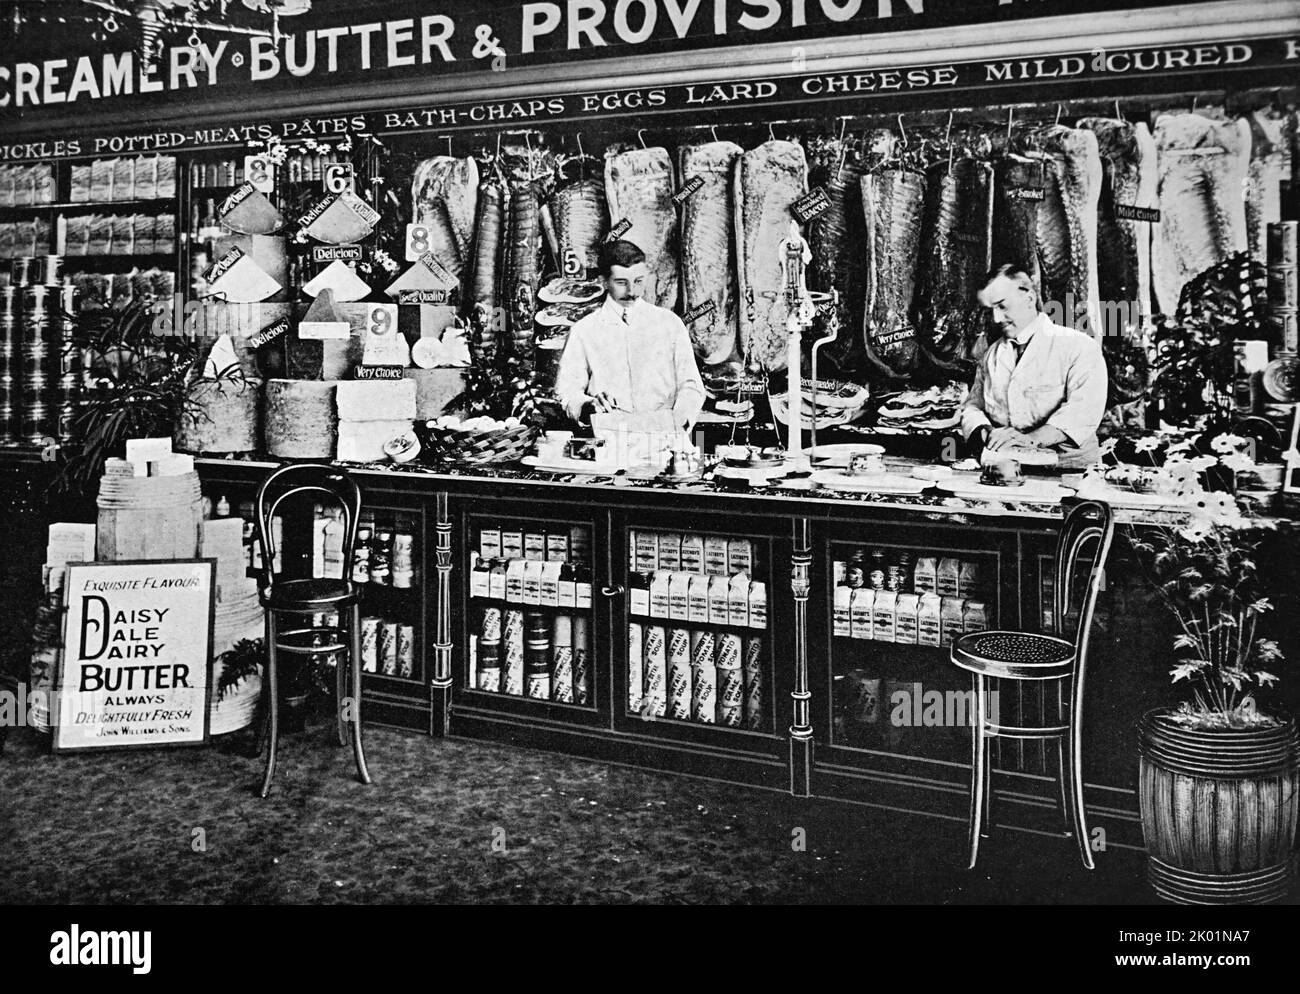 Provision counter showing cleanliness of both staff and goods on offer. Stock Photo